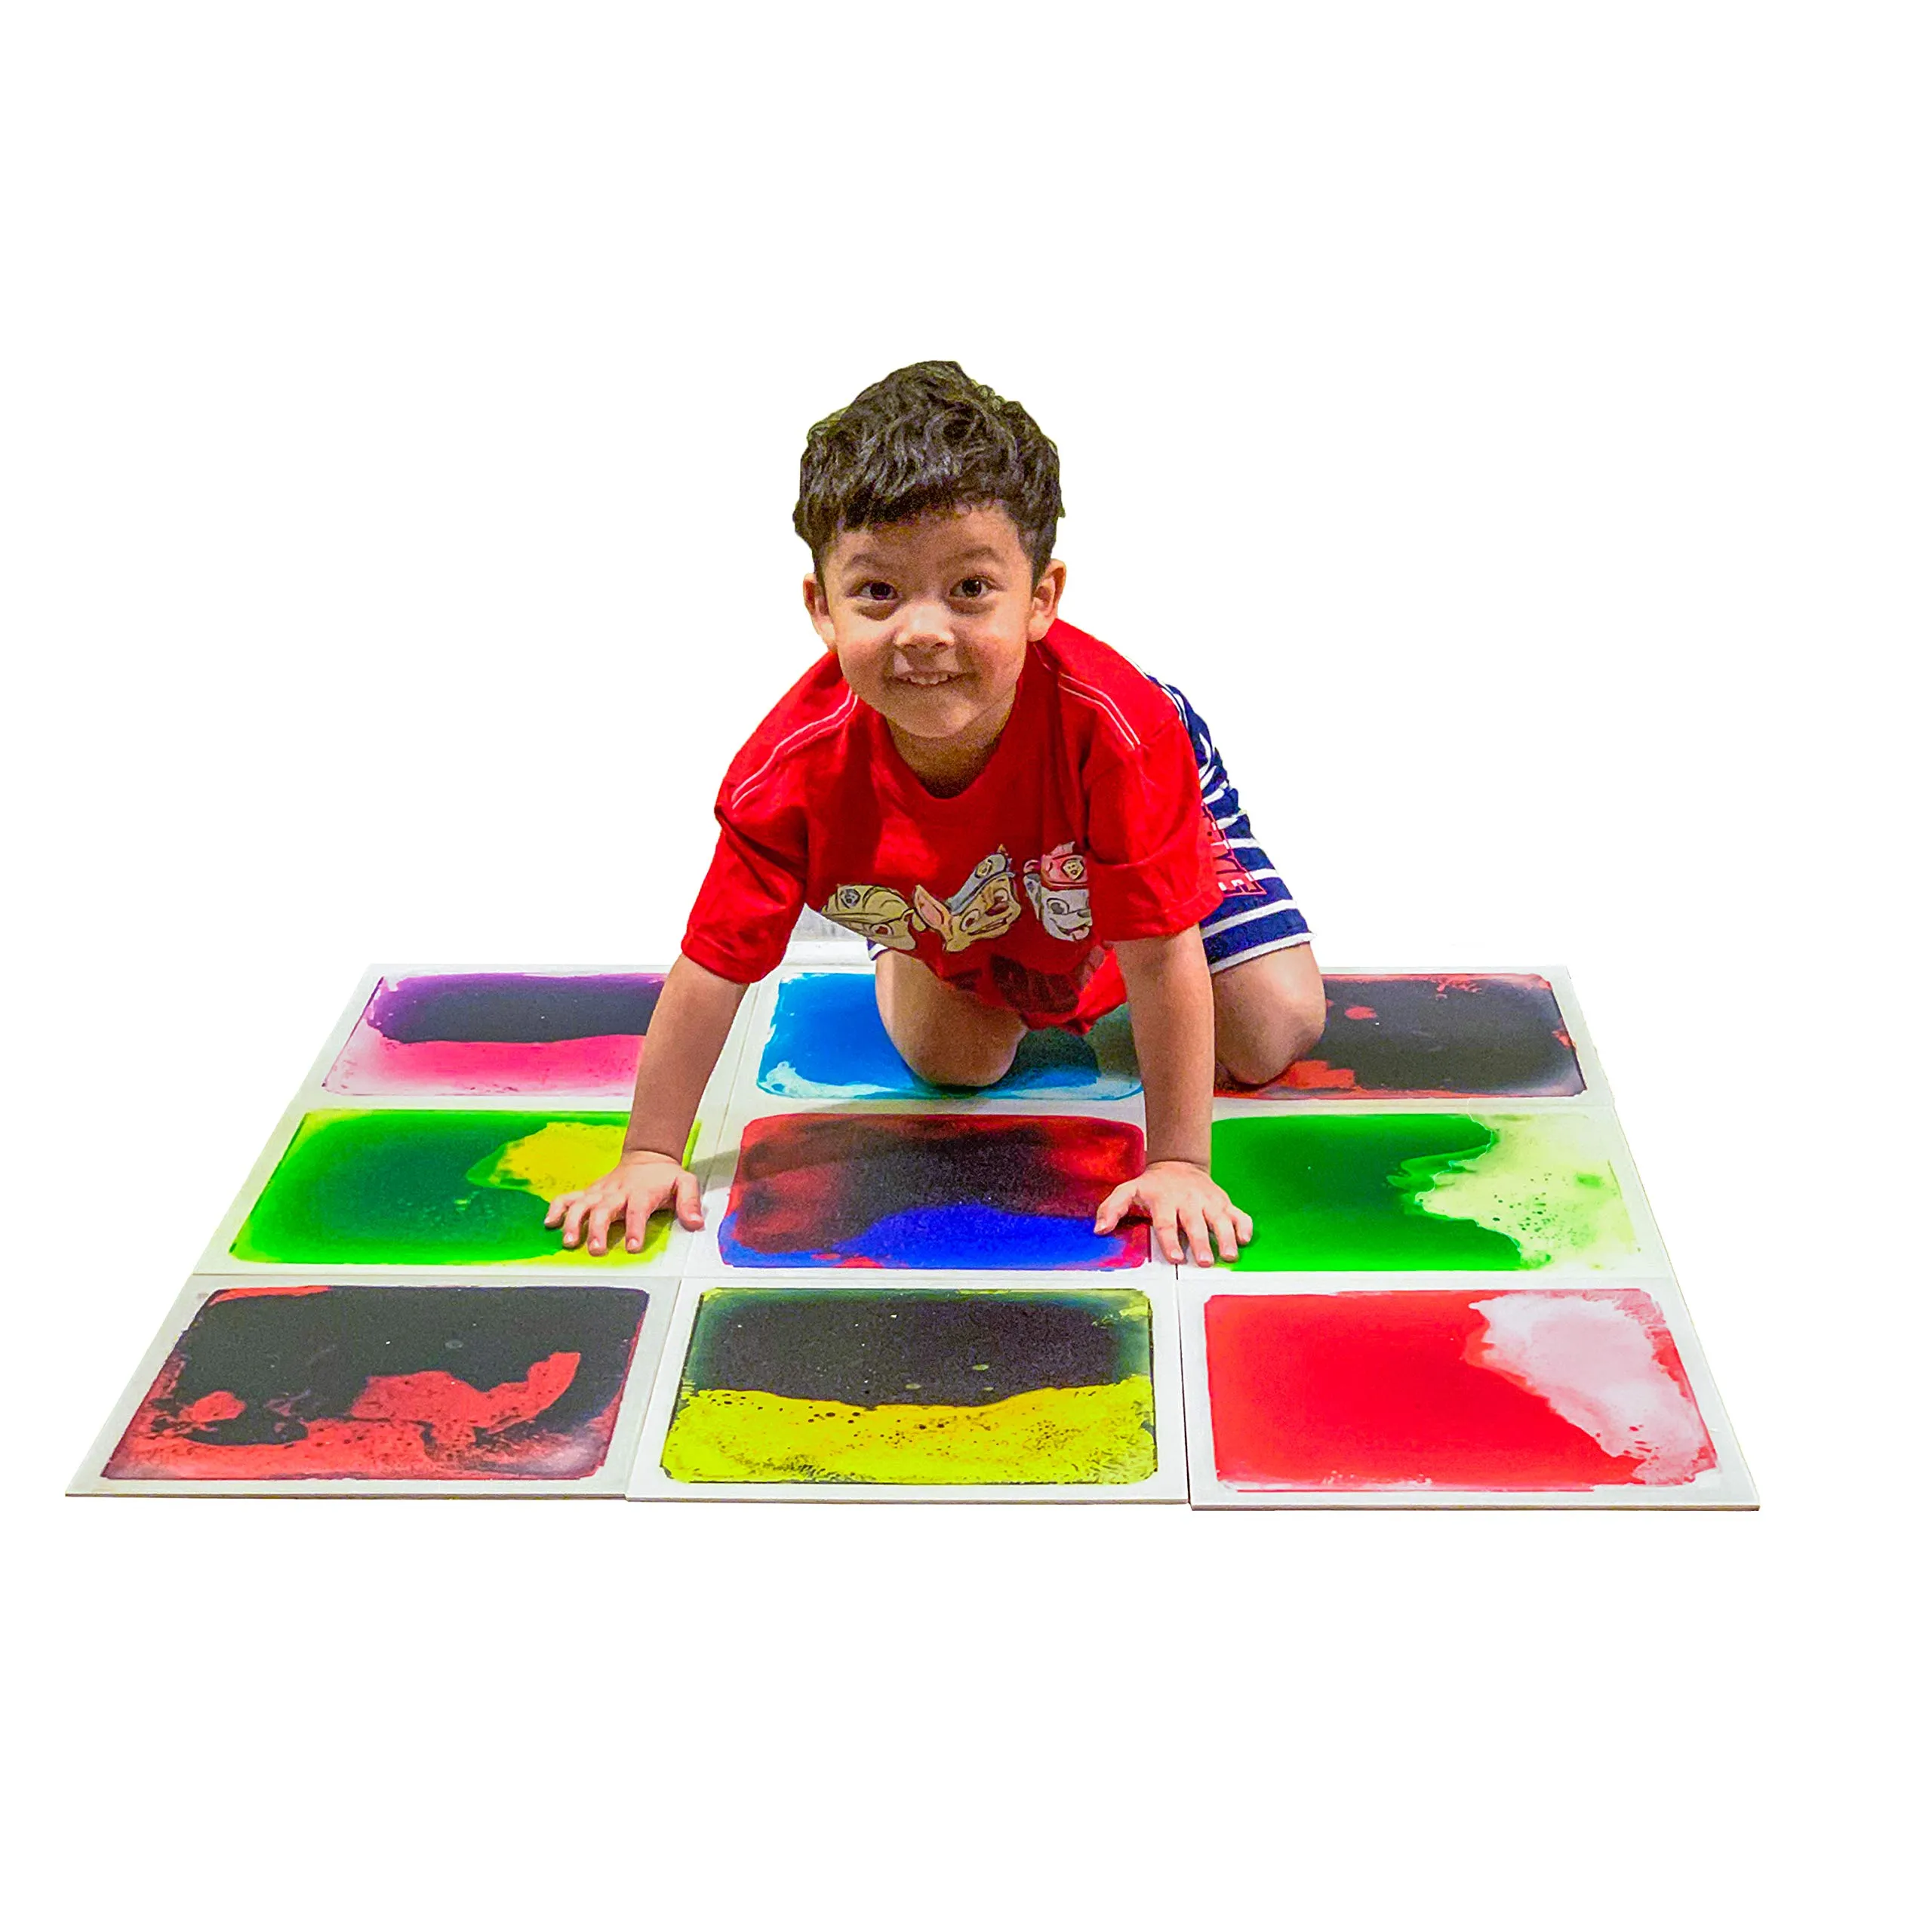 Art3d Liquid Fusion Activity Play Centers for Children, Toddler, Teens, 12x12 inch Pack of 9 Tiles